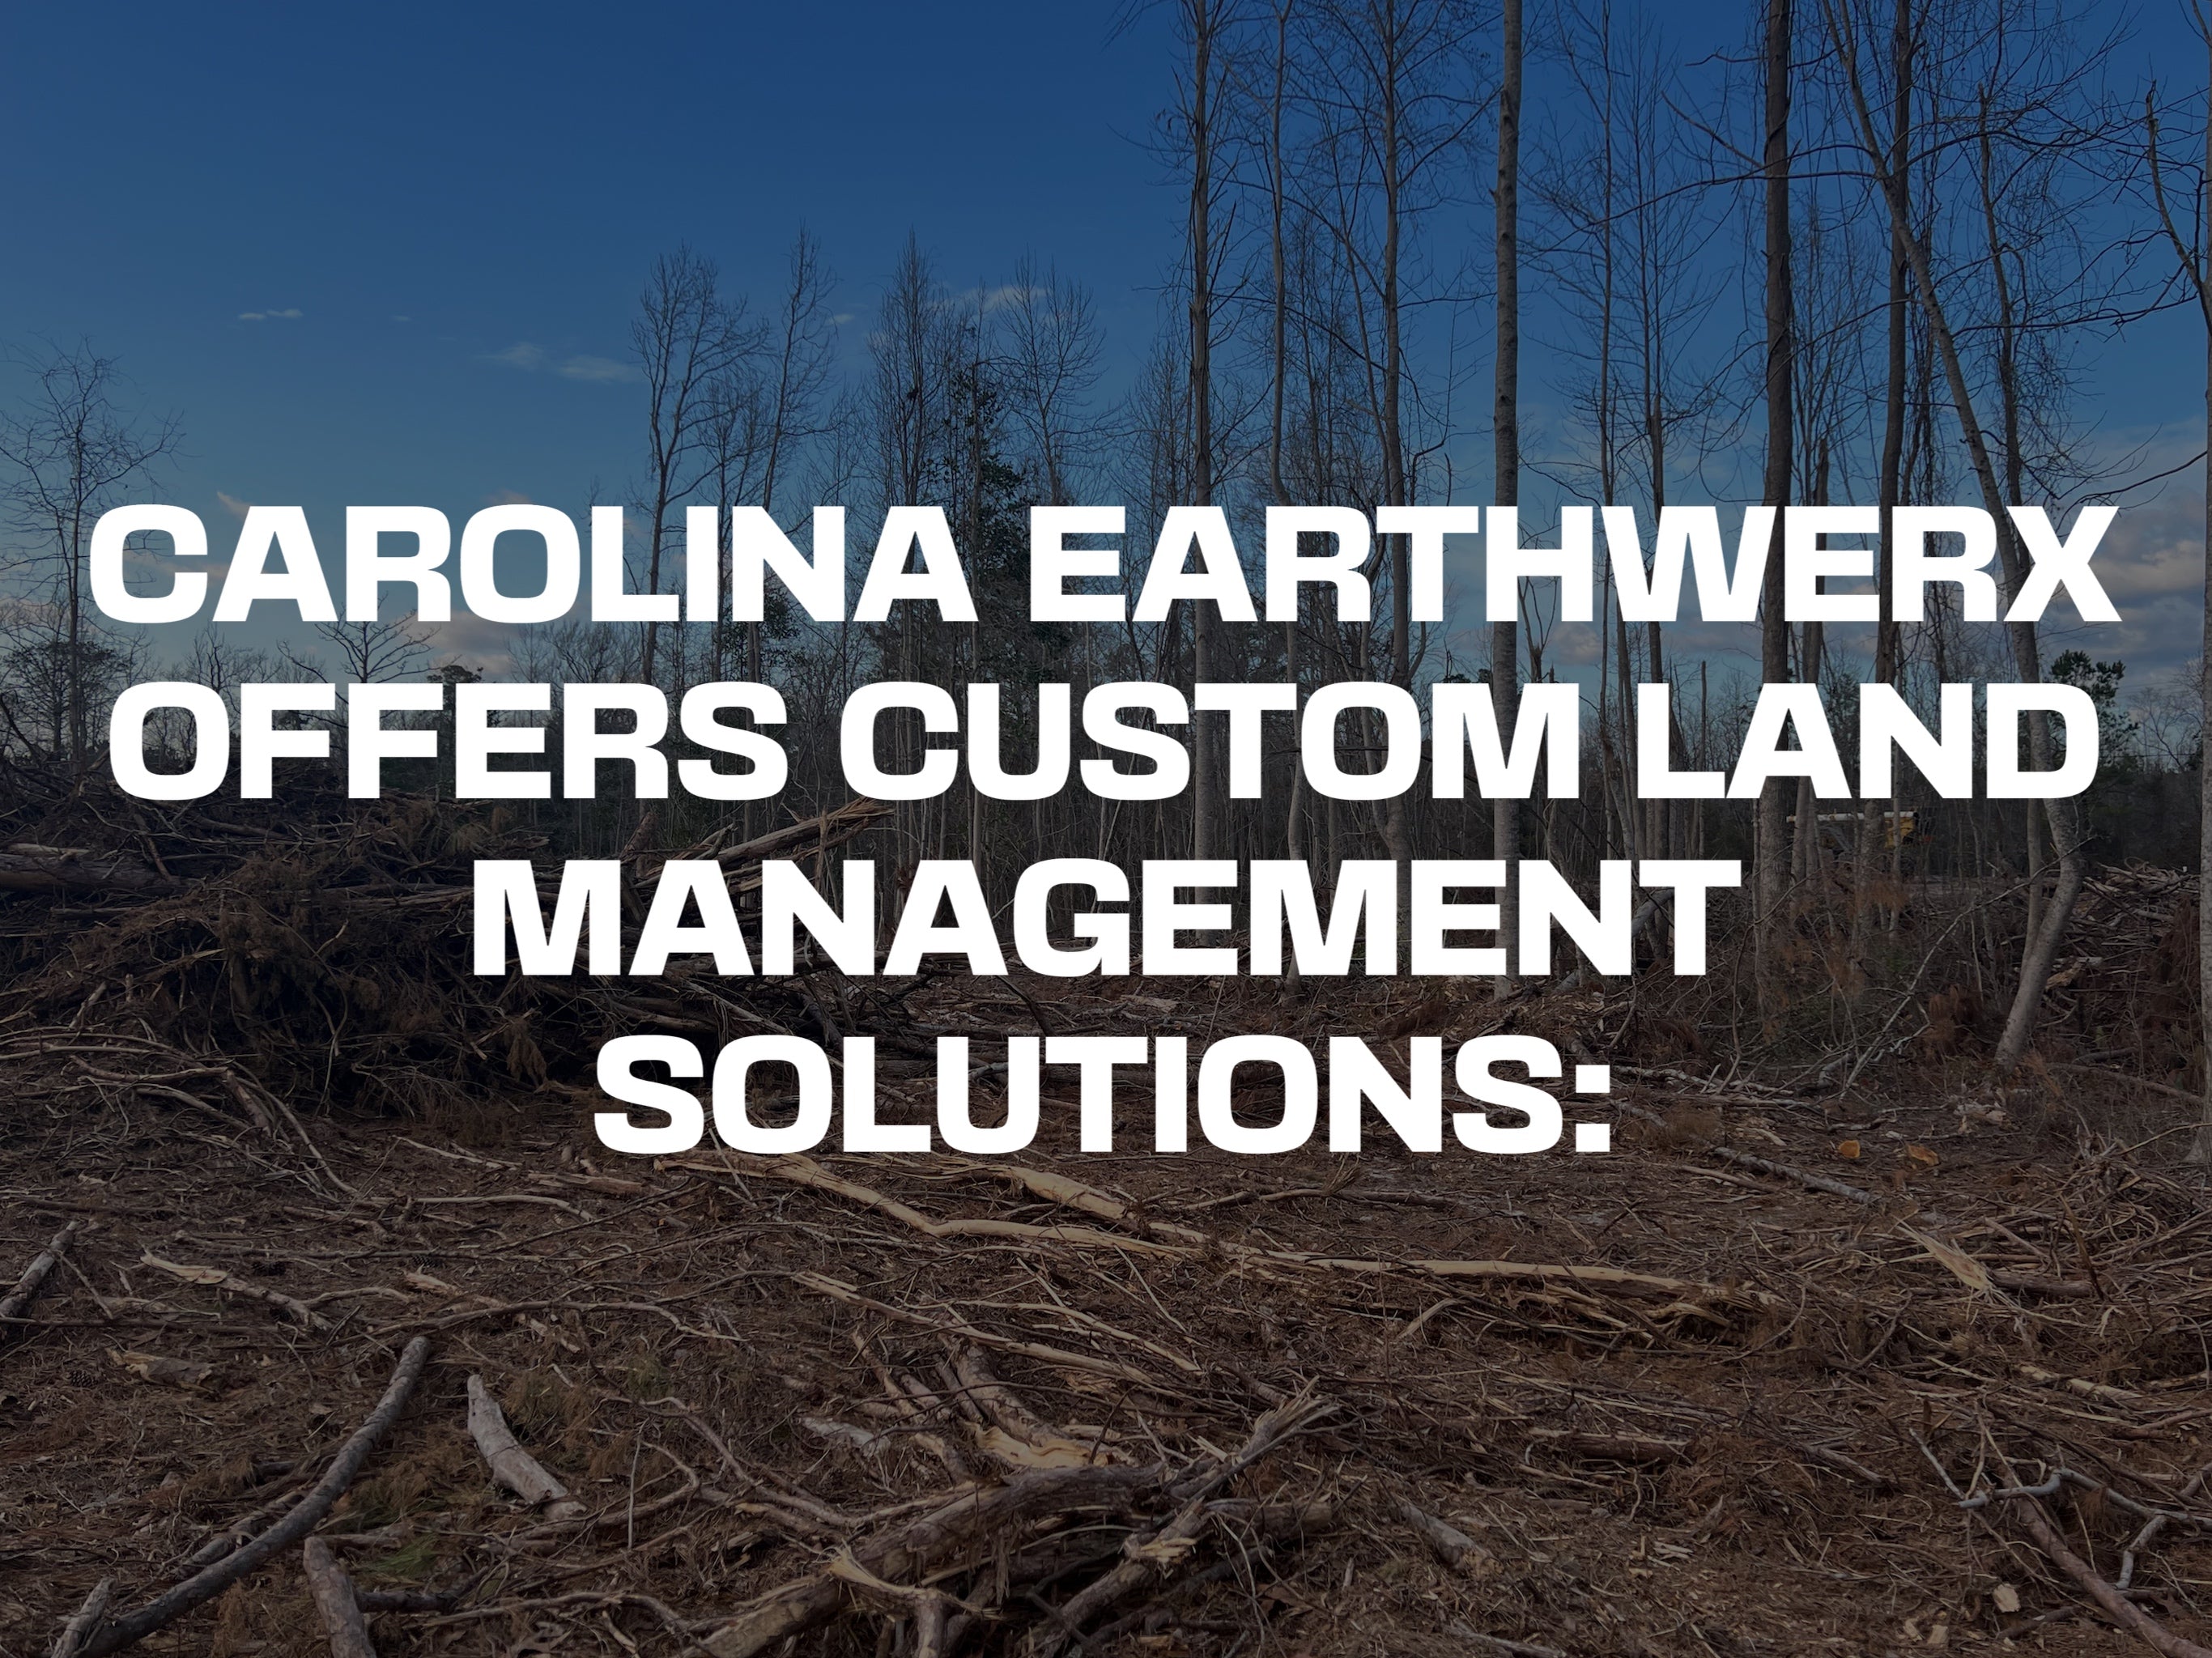 CAROLINA EARTHWERX OFFERS CUSTOM LAND MANAGEMENT SOLUTIONS FOR EACH PROJECT.